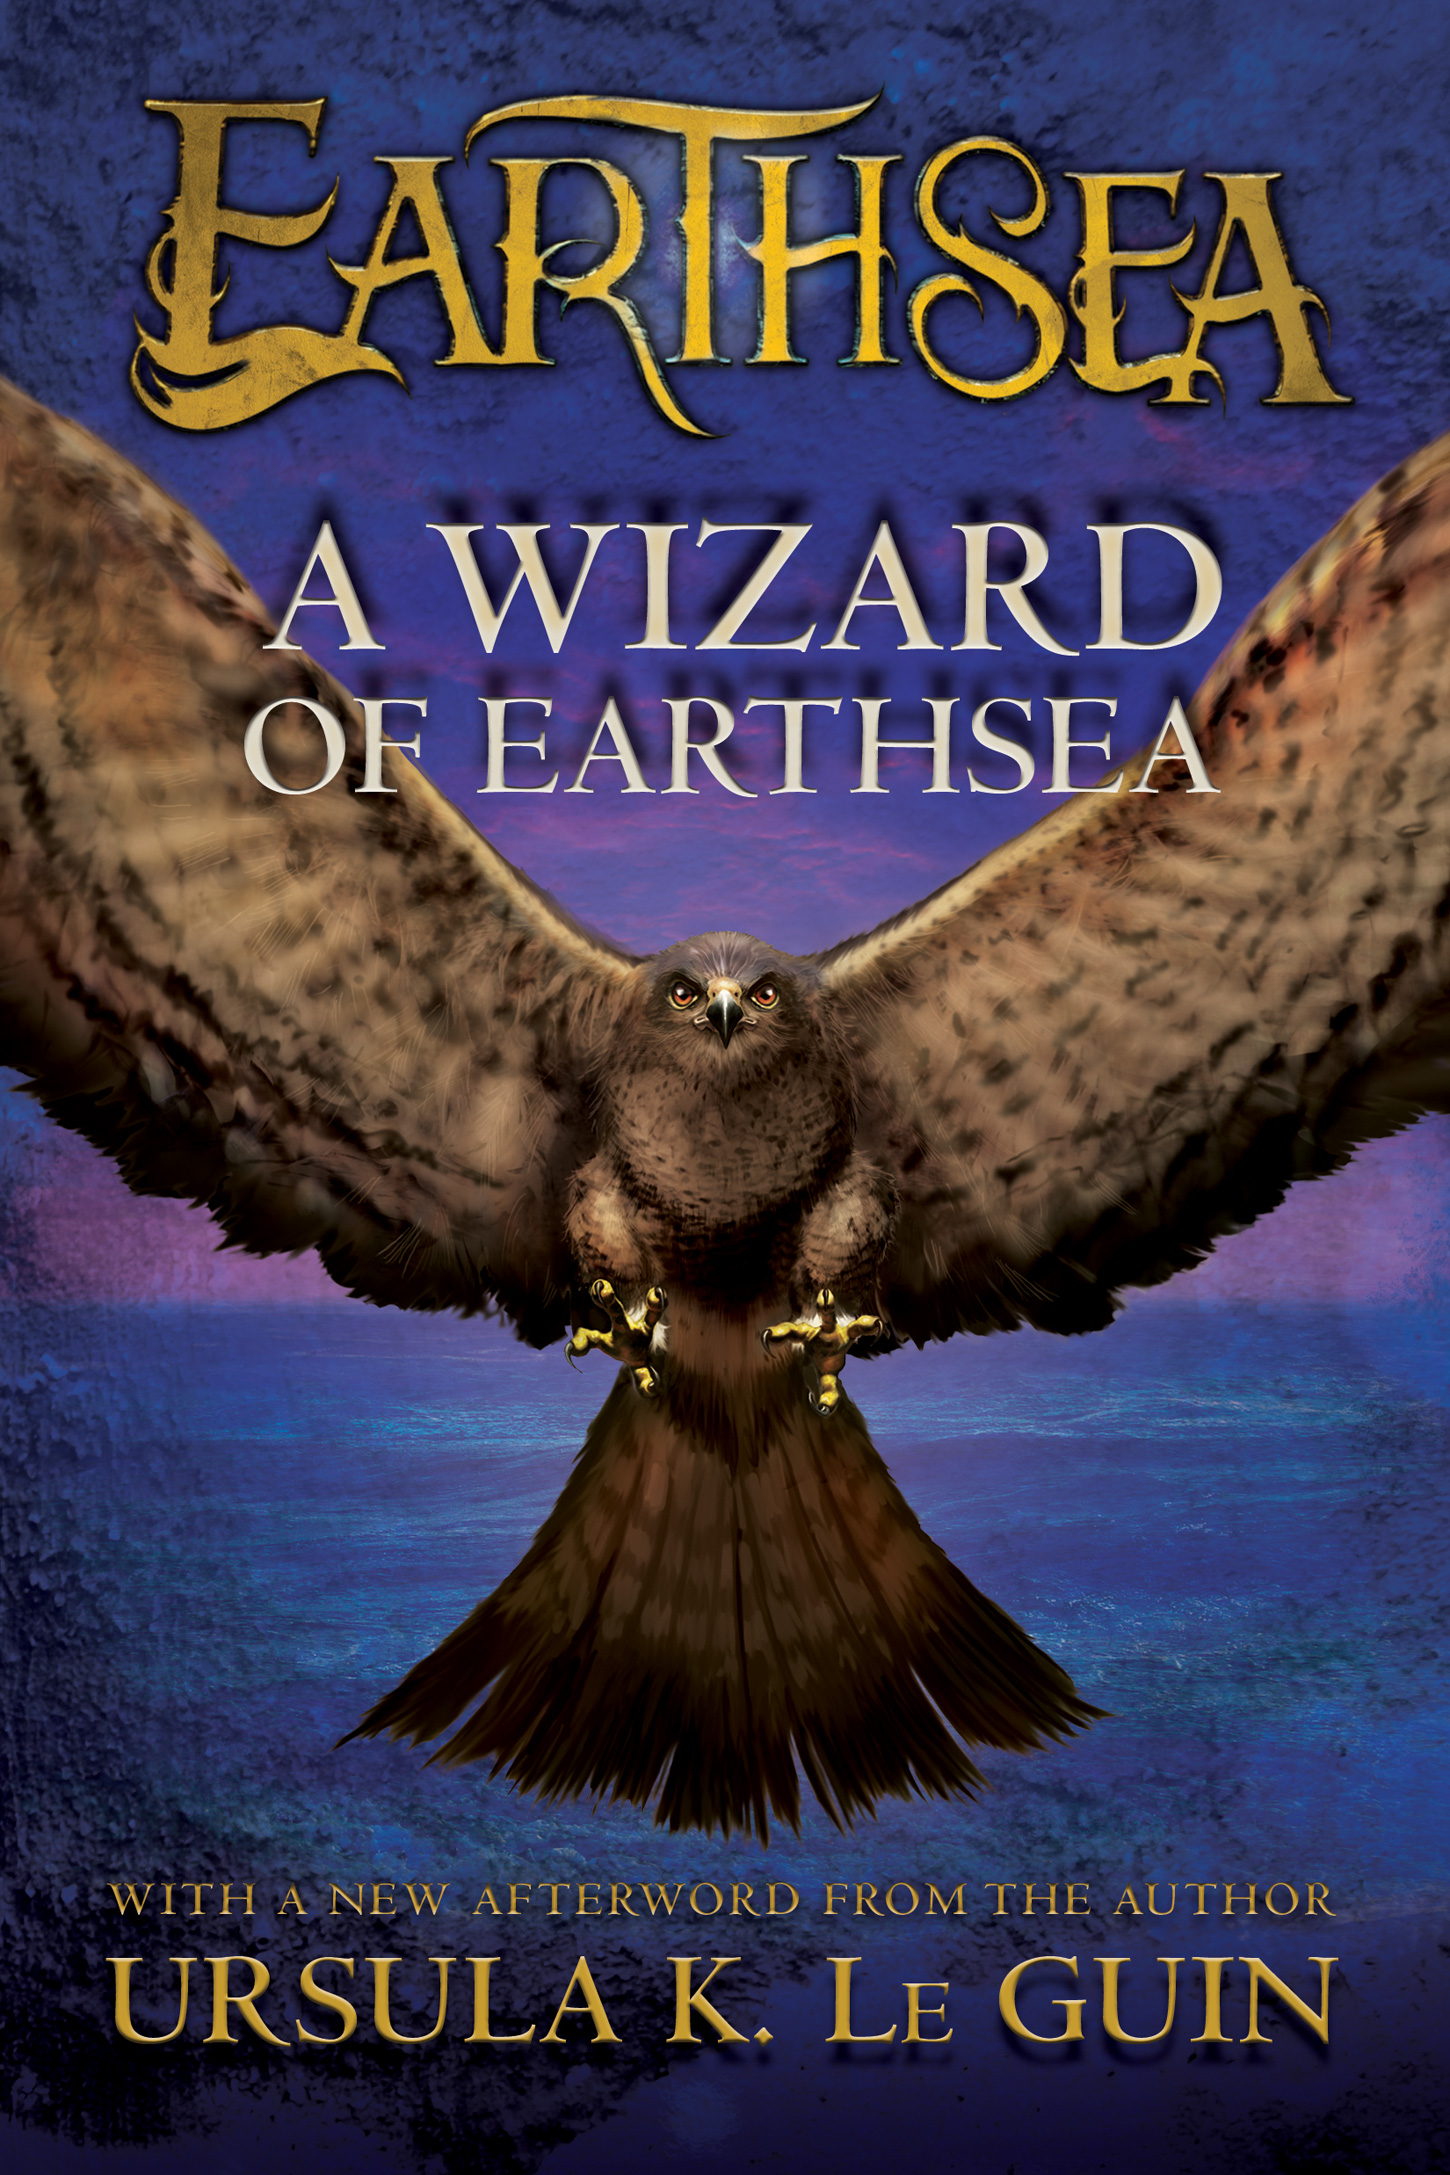 2015: A WIZARD OF EARTHSEA by Ursula K. Le Guin